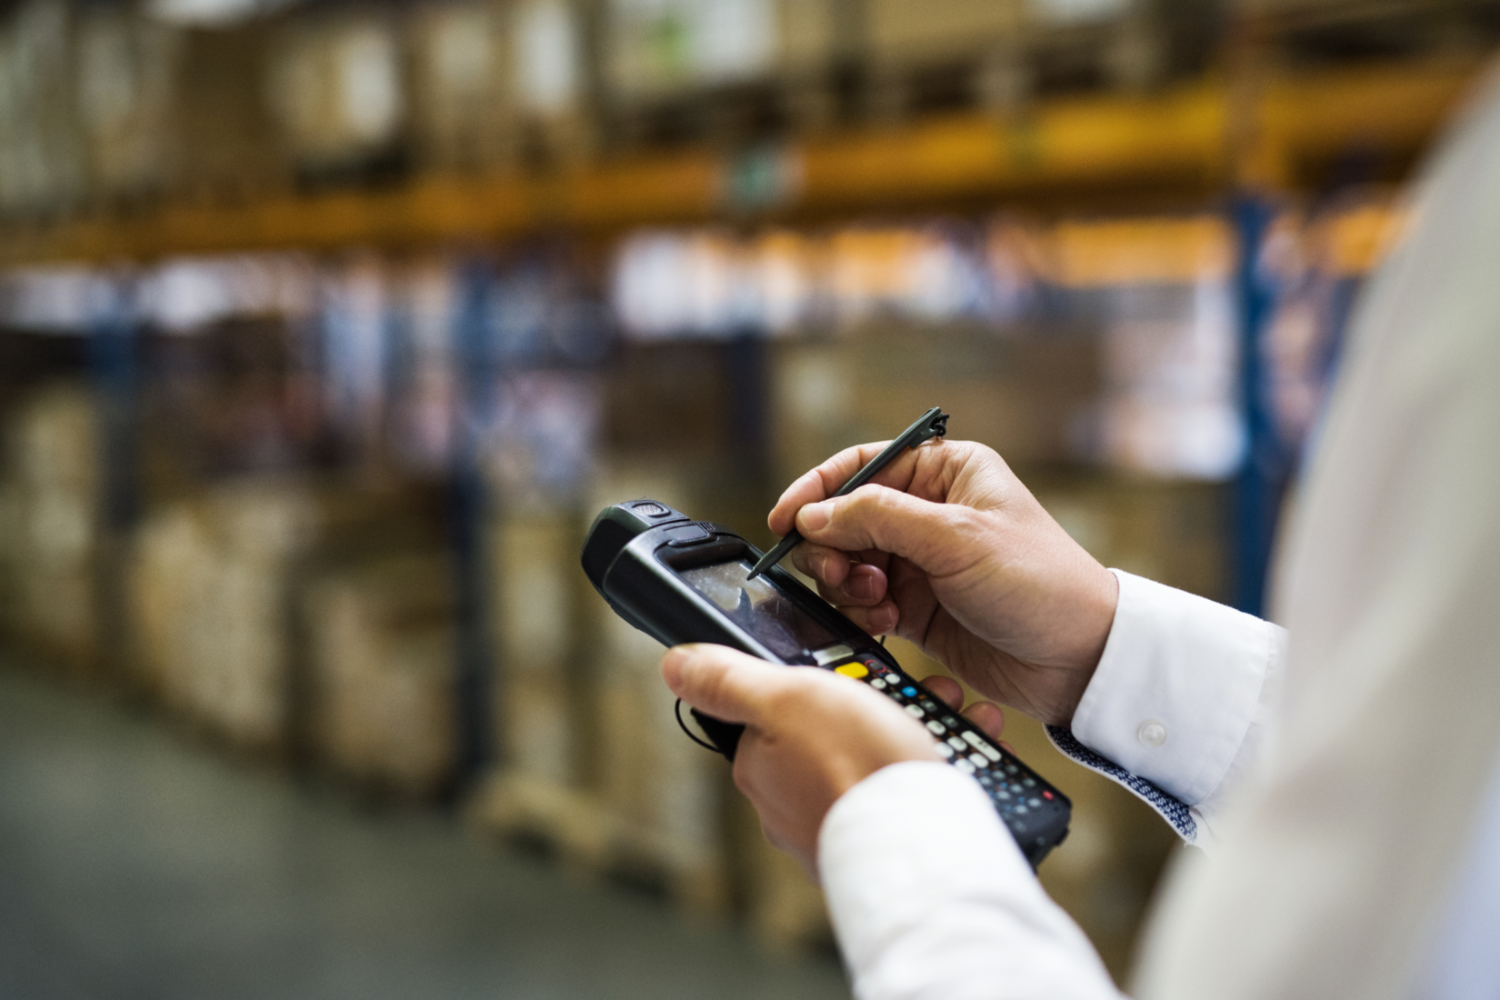 RFgen offers supply chain solutions powered by mobile barcoding software, hardware, and mobile apps.